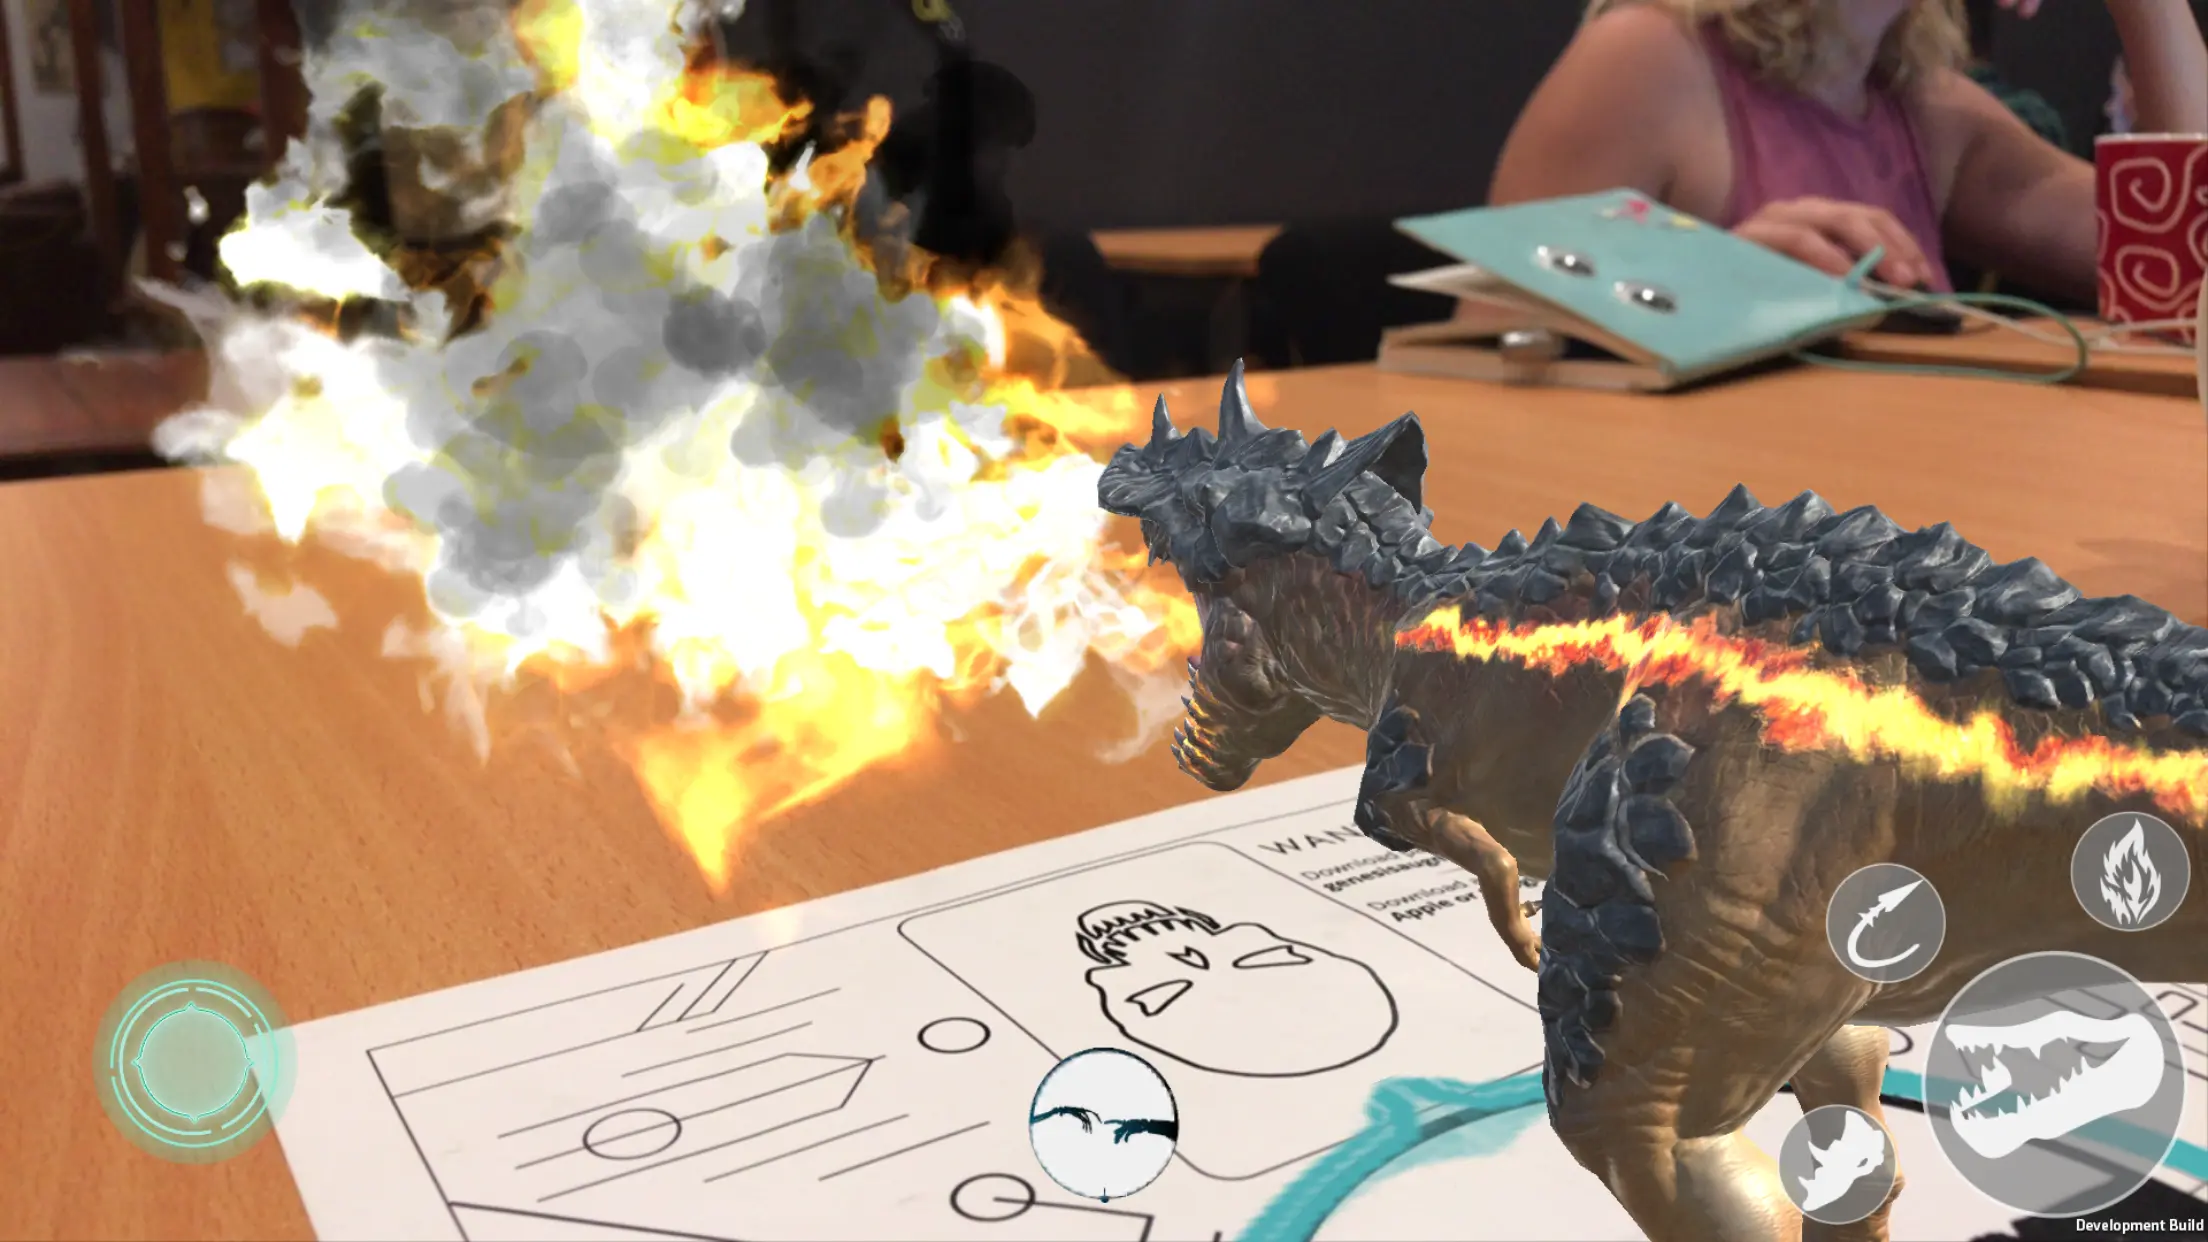 Genesis Augmented Reality gameplay. Tyrant doing a fire breathing attack in Genesis AR Card Game